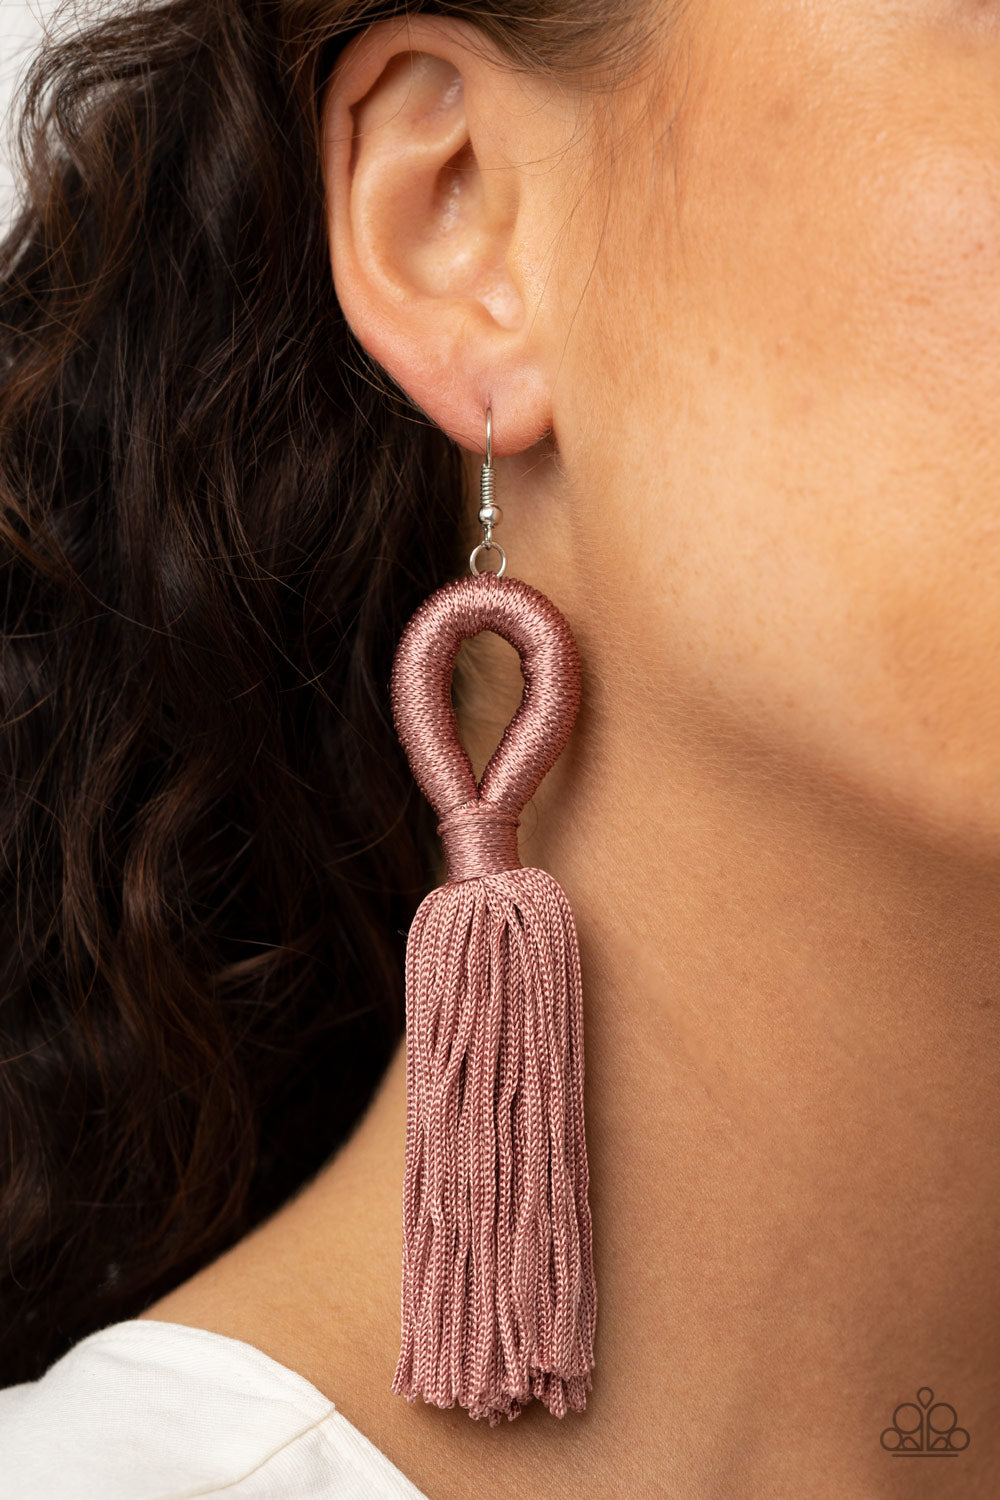 Paparazzi Earring  Hold On To Your Tassel  Pink  Paparazzi Jewelry   Online Store  DebsJewelryShopcom